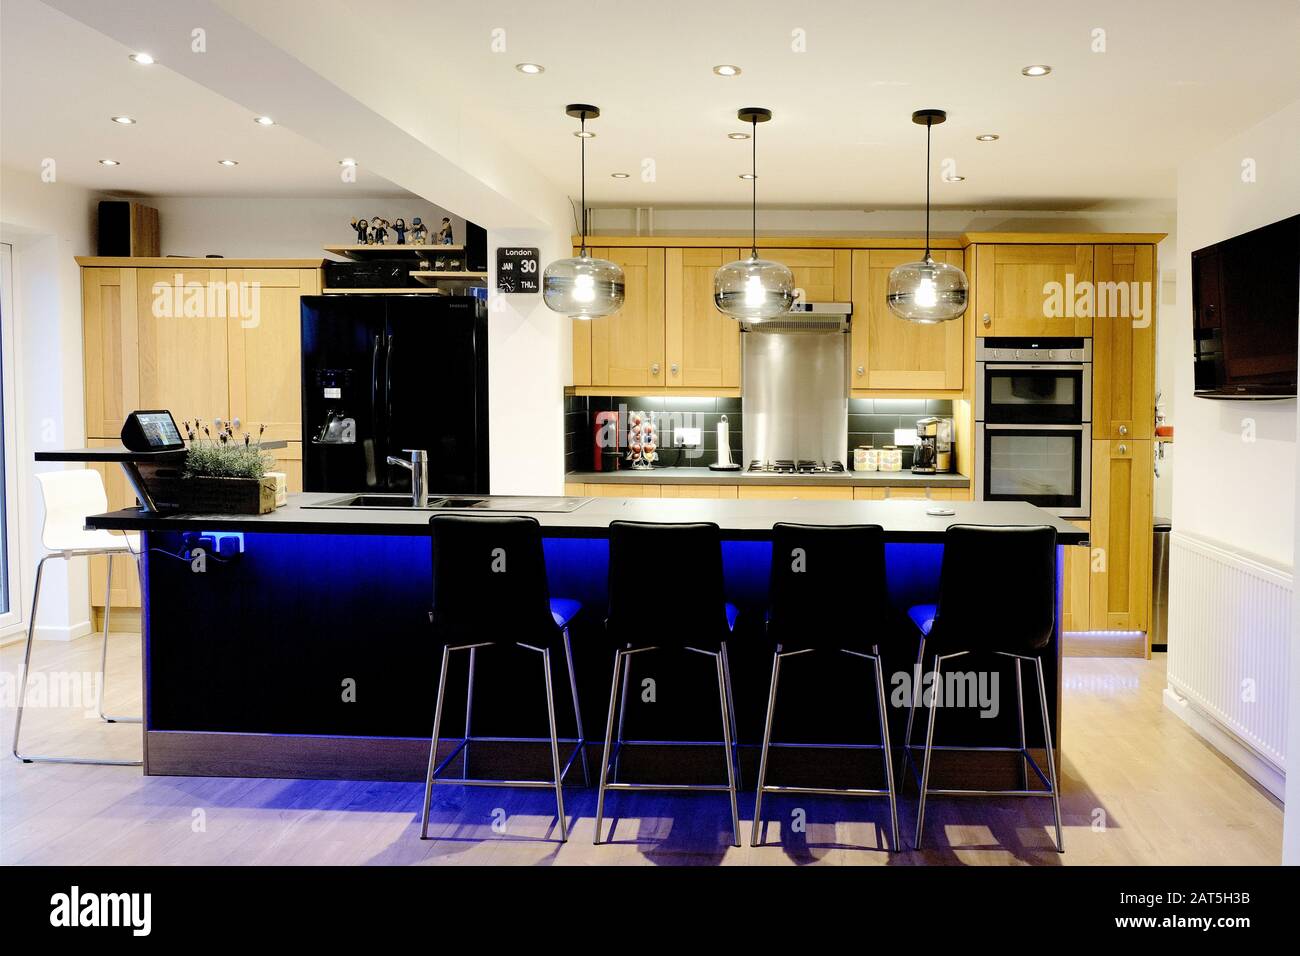 A smart modern kitchen in a modern, British, home featuring a large island with bar stools and wooden kitchen units. The kitchen is illuminated. Stock Photo